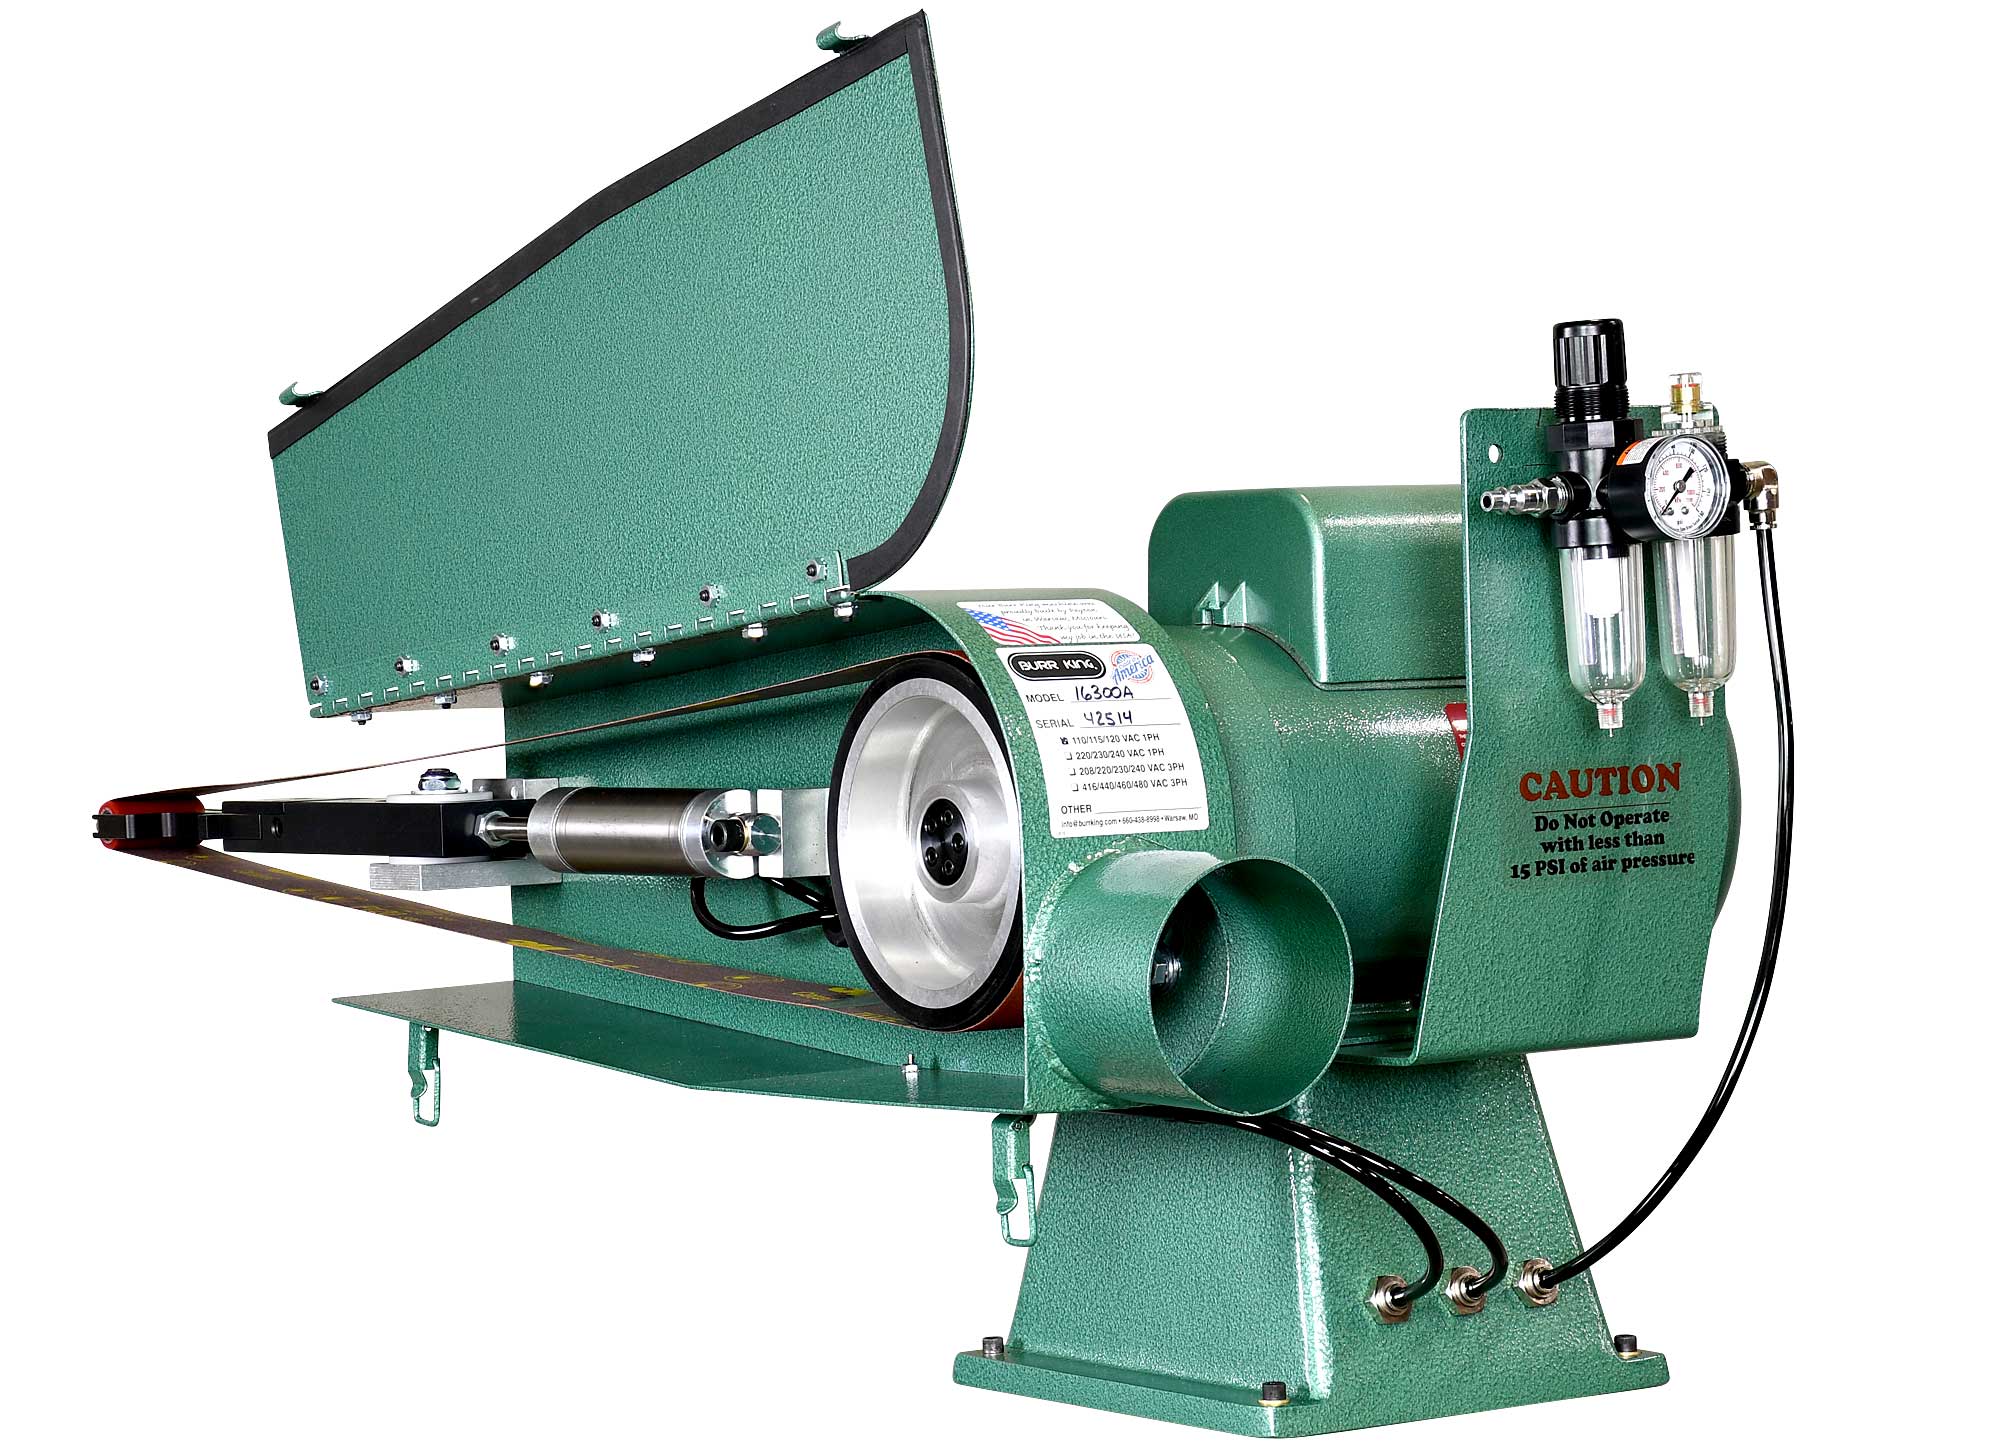 16300A -  Air tension fixed speed M720 probe grinder features a simplified tension system that allows users to easily regulate belt tension 